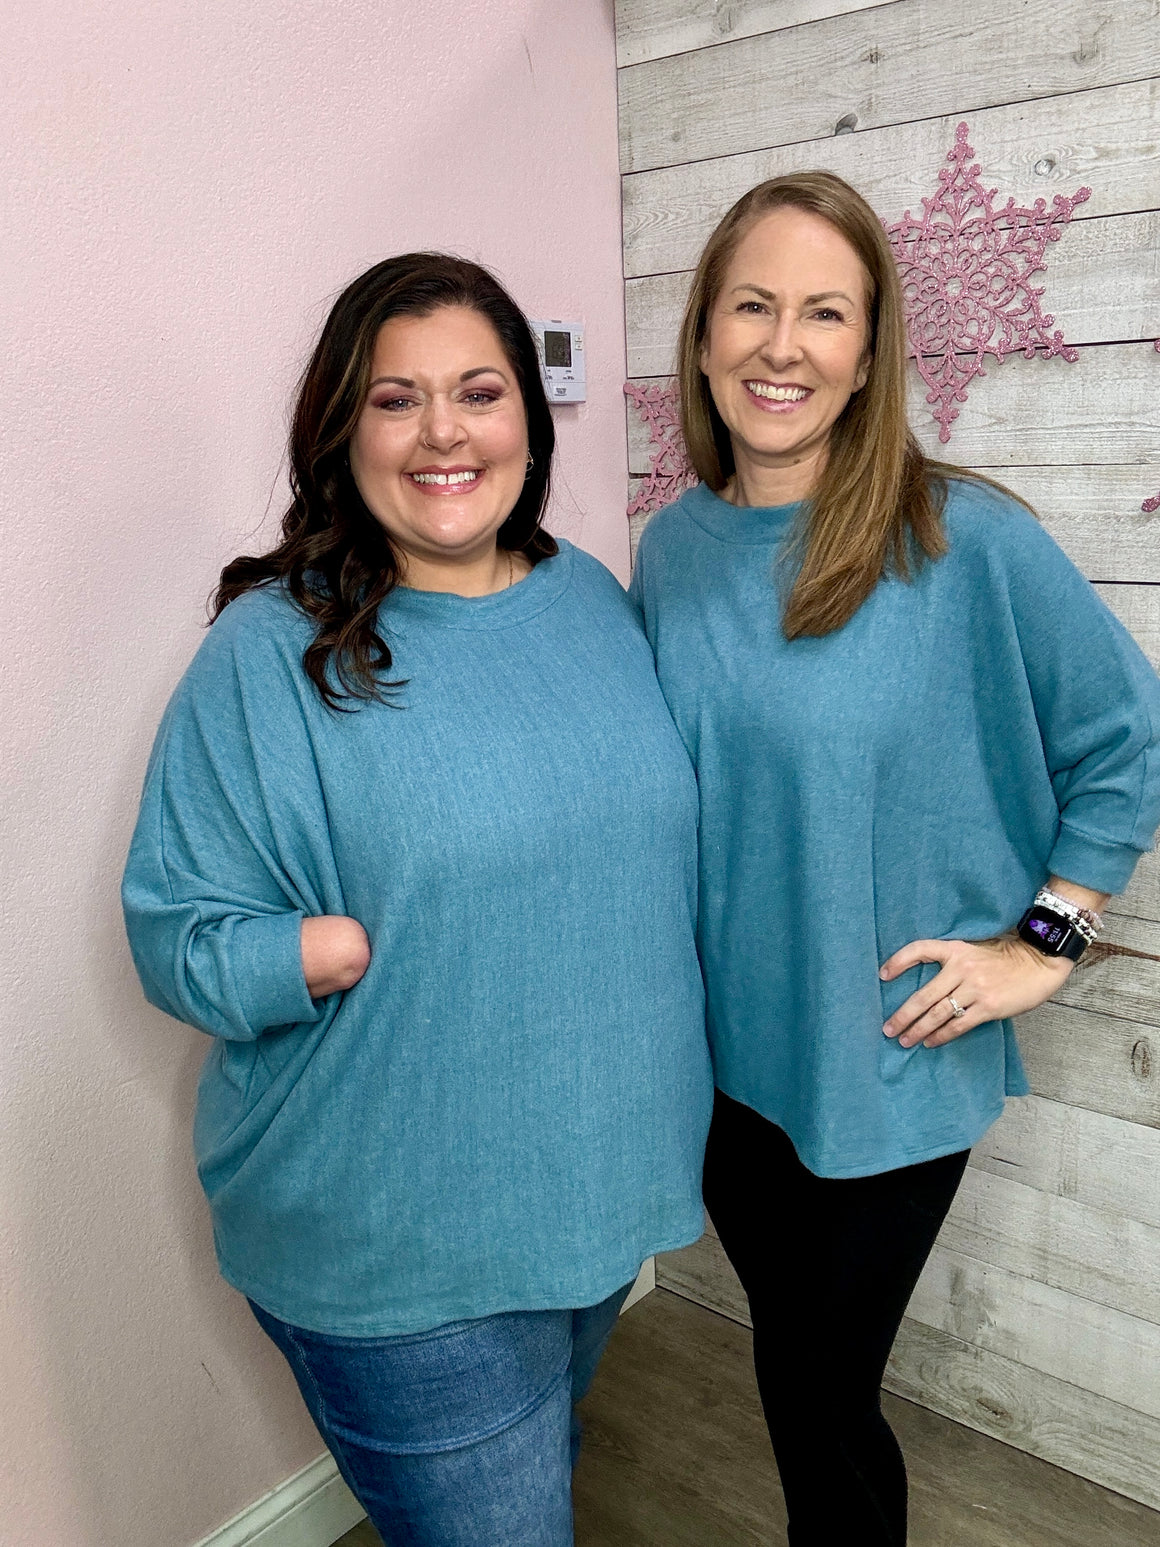 BF "I'll Be There" Soft Teal Top